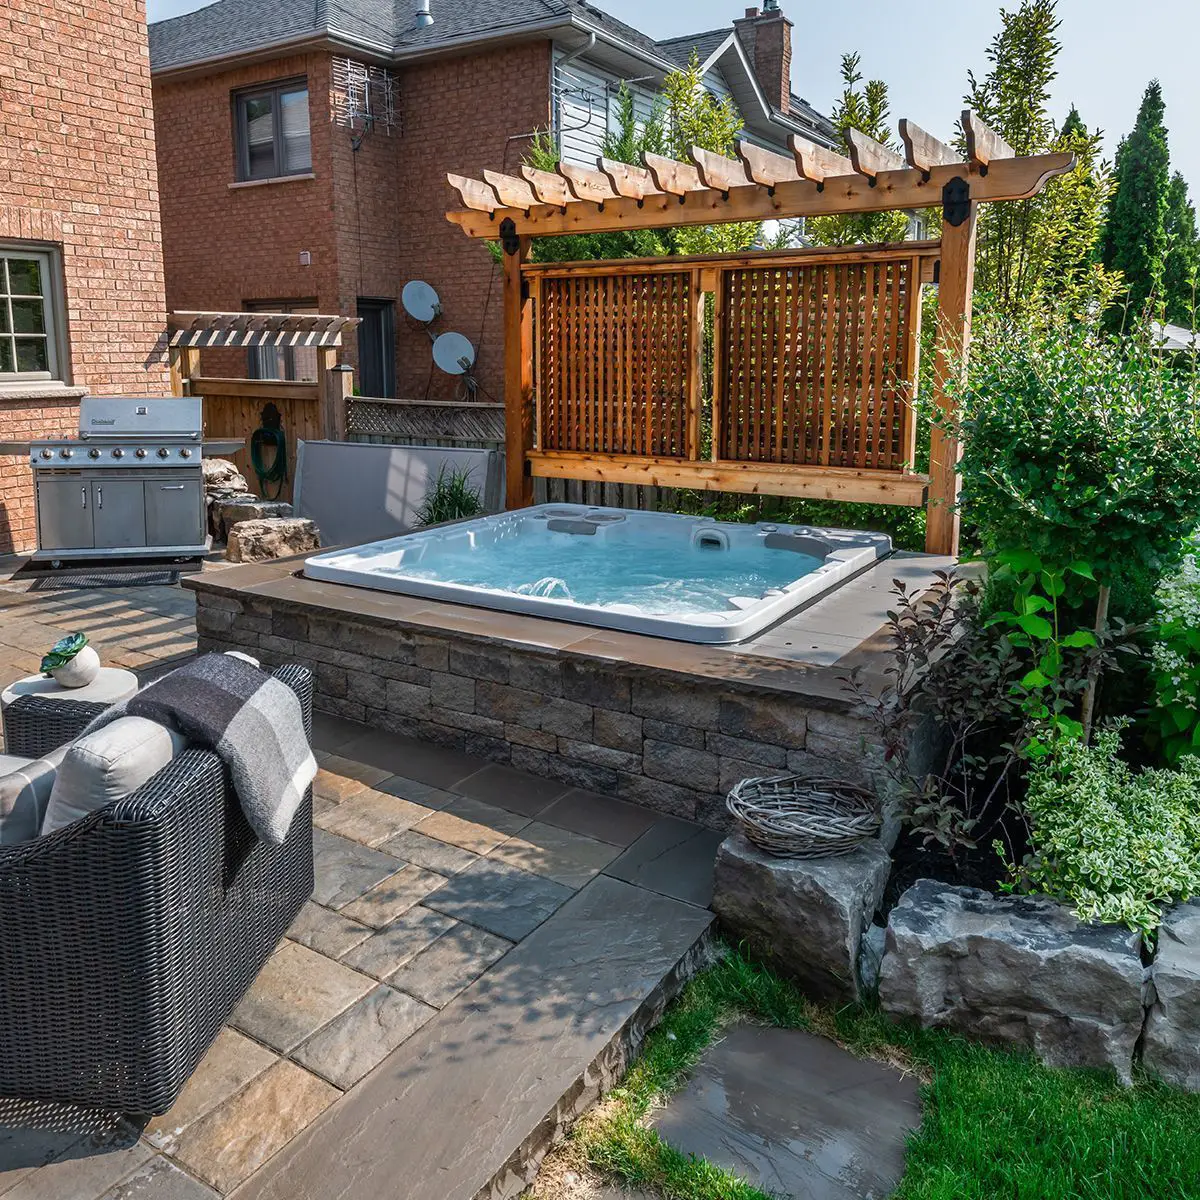 34 Inspiring Hot Tub Patio Design Ideas For Your Outdoor Decor (With ...